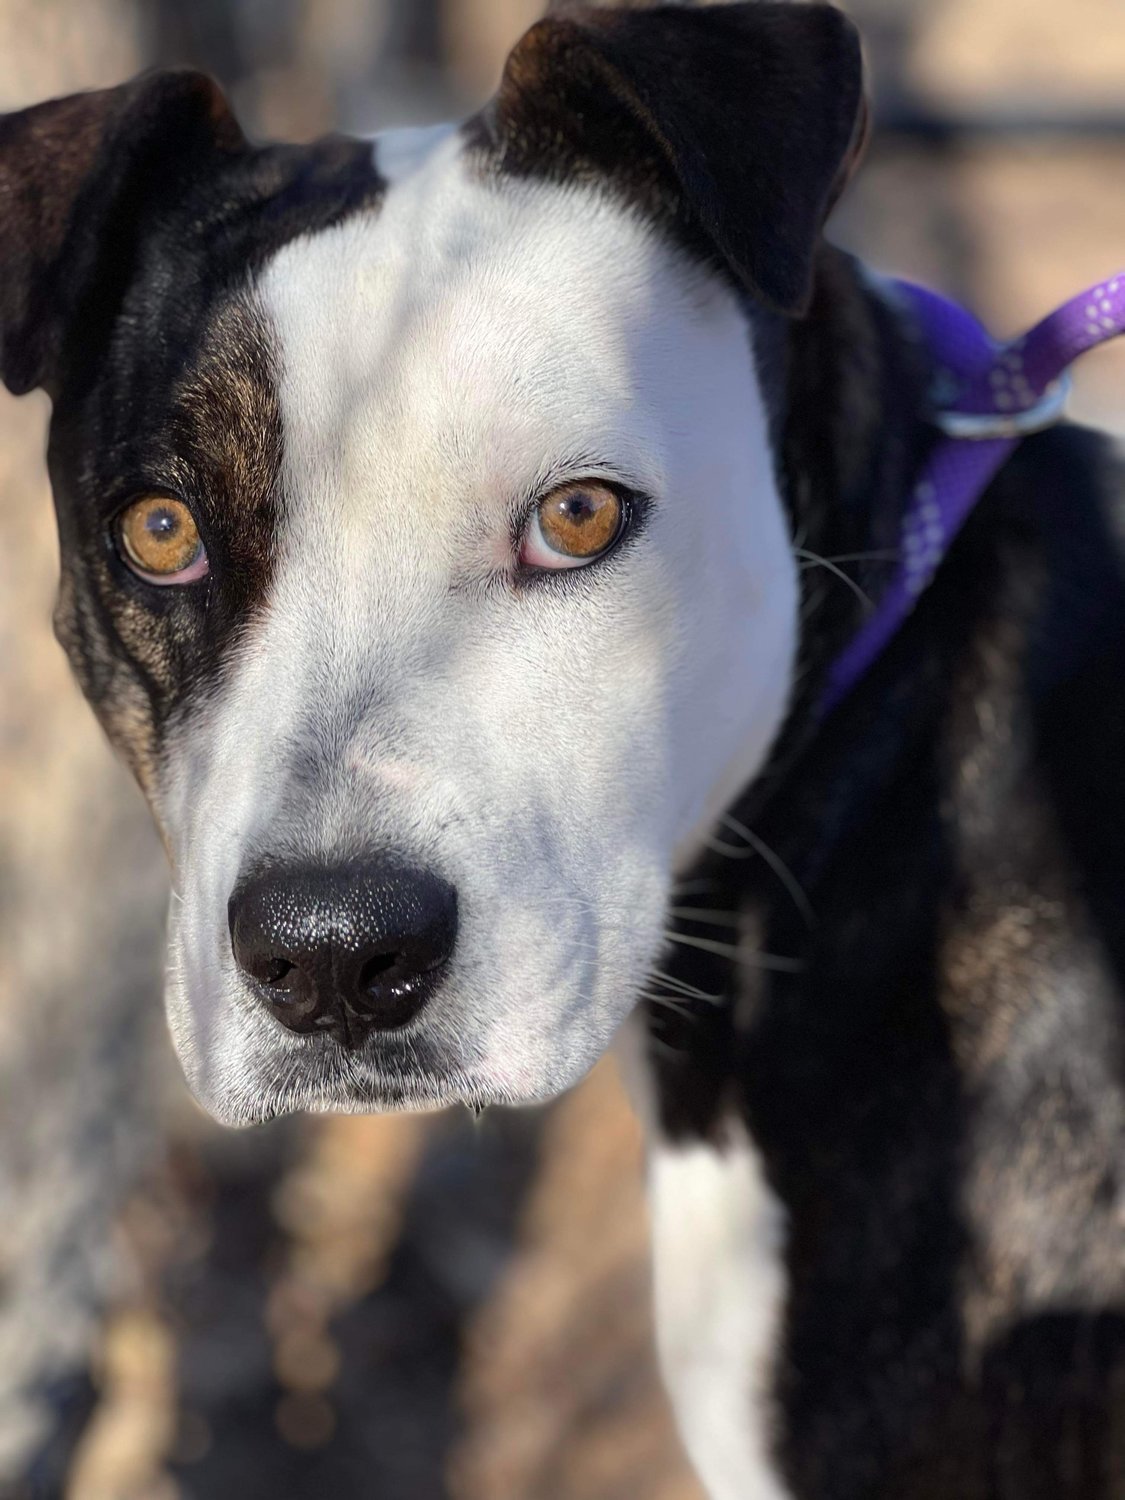 Diamond is a black and white Pit mix; good with dogs, affectionate and cuddly; about 1-2 years old; 50 lbs. Email Deborah Haller, volunteer rescue coordinator, at dshrescuedogs15@gmail.com for more information about Diamond.